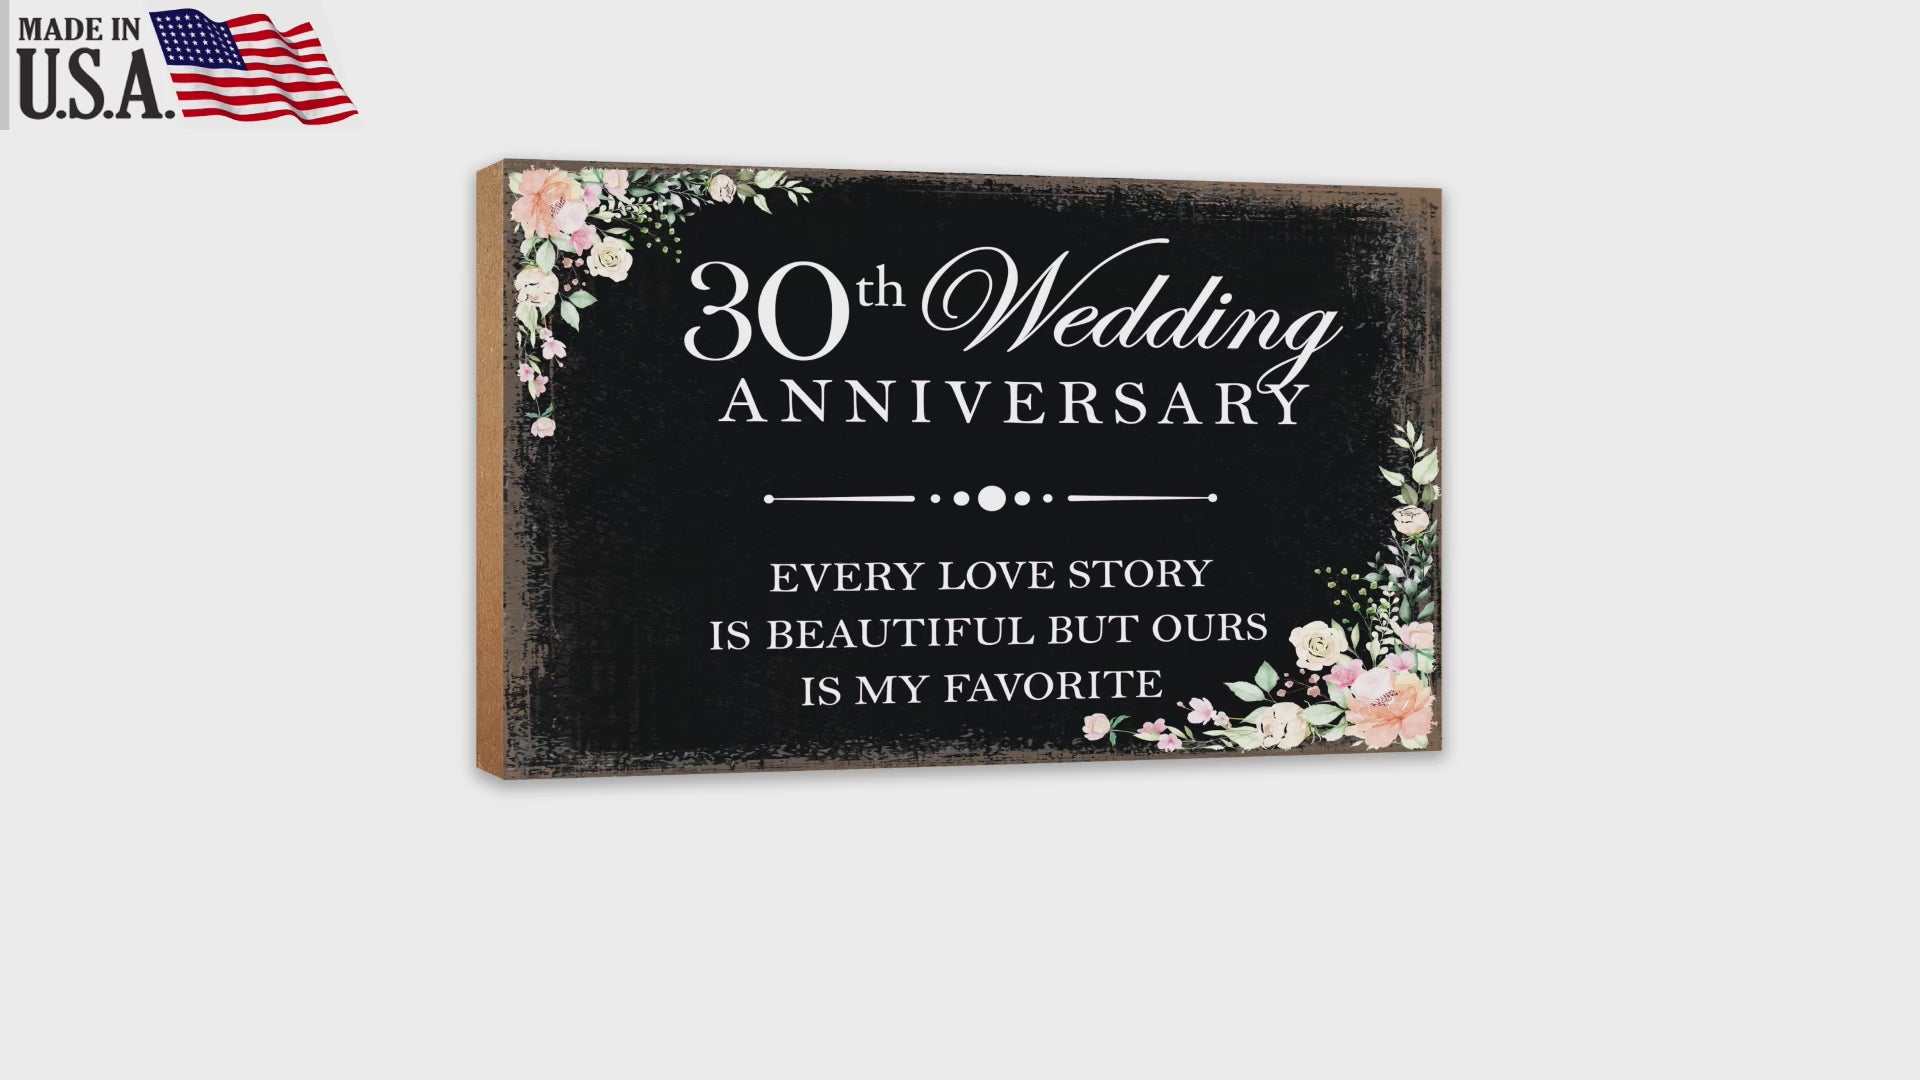 30th Wedding Anniversary Unique Shelf Decor and Tabletop Signs Gift for Couples - Every Love Story